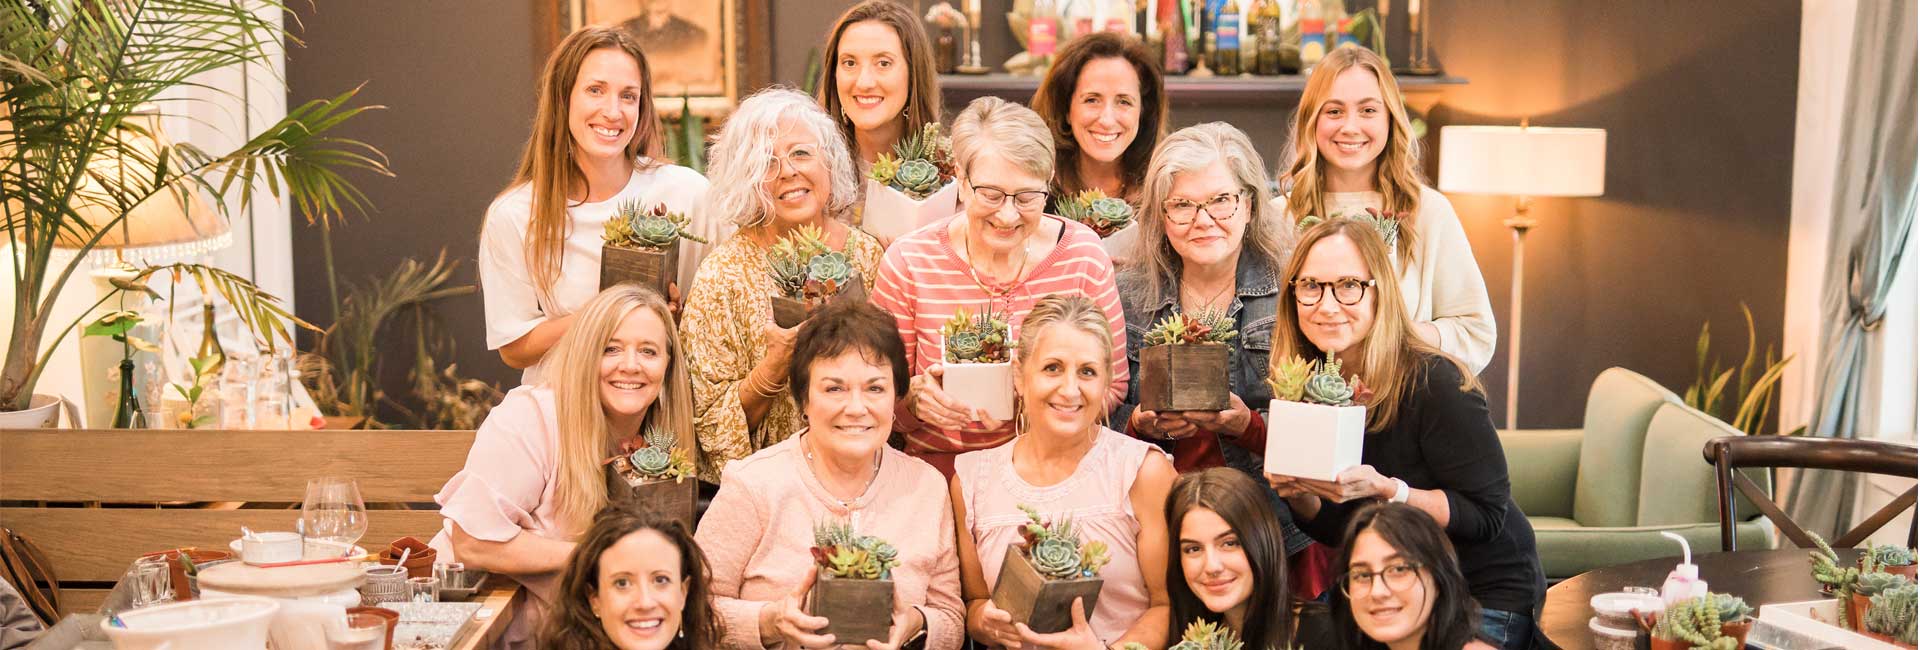 Build Your Own Succulent Workshop with Rooted Treasures Succulents